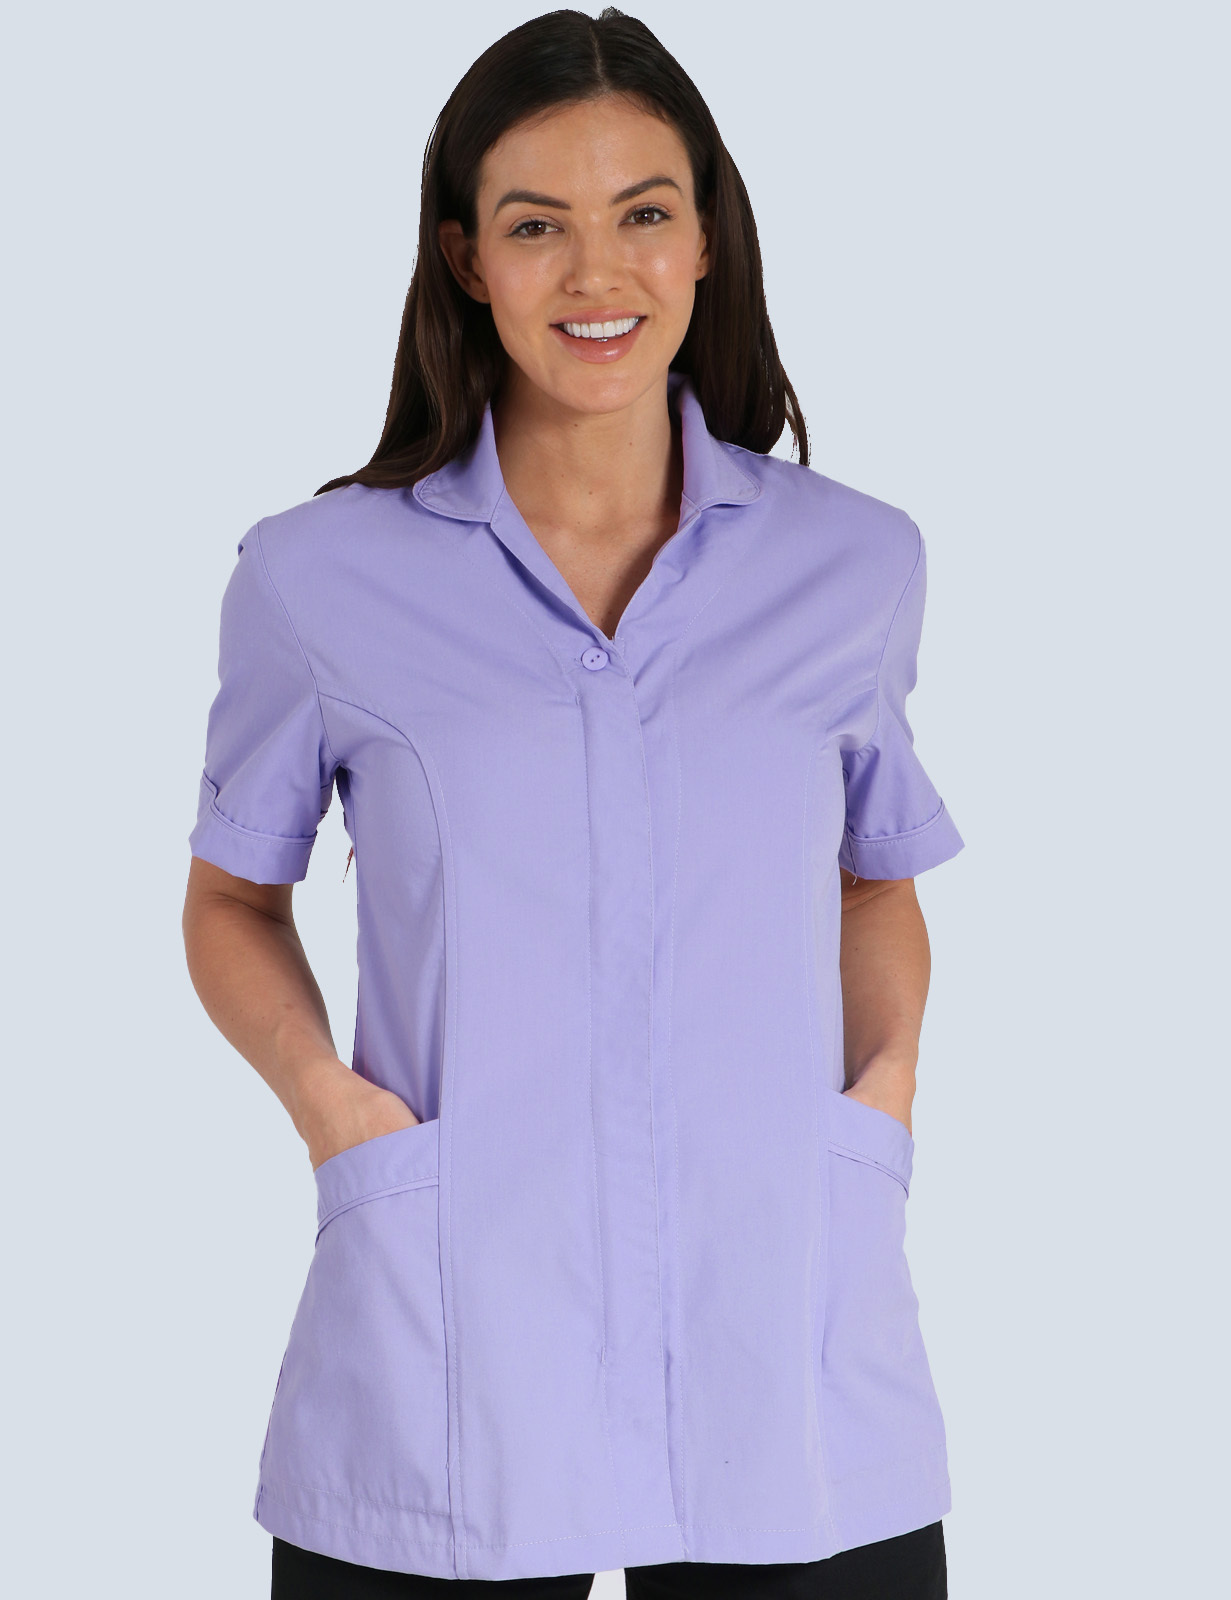 Bonnie Style Tunic Top - Lilac - XX Small